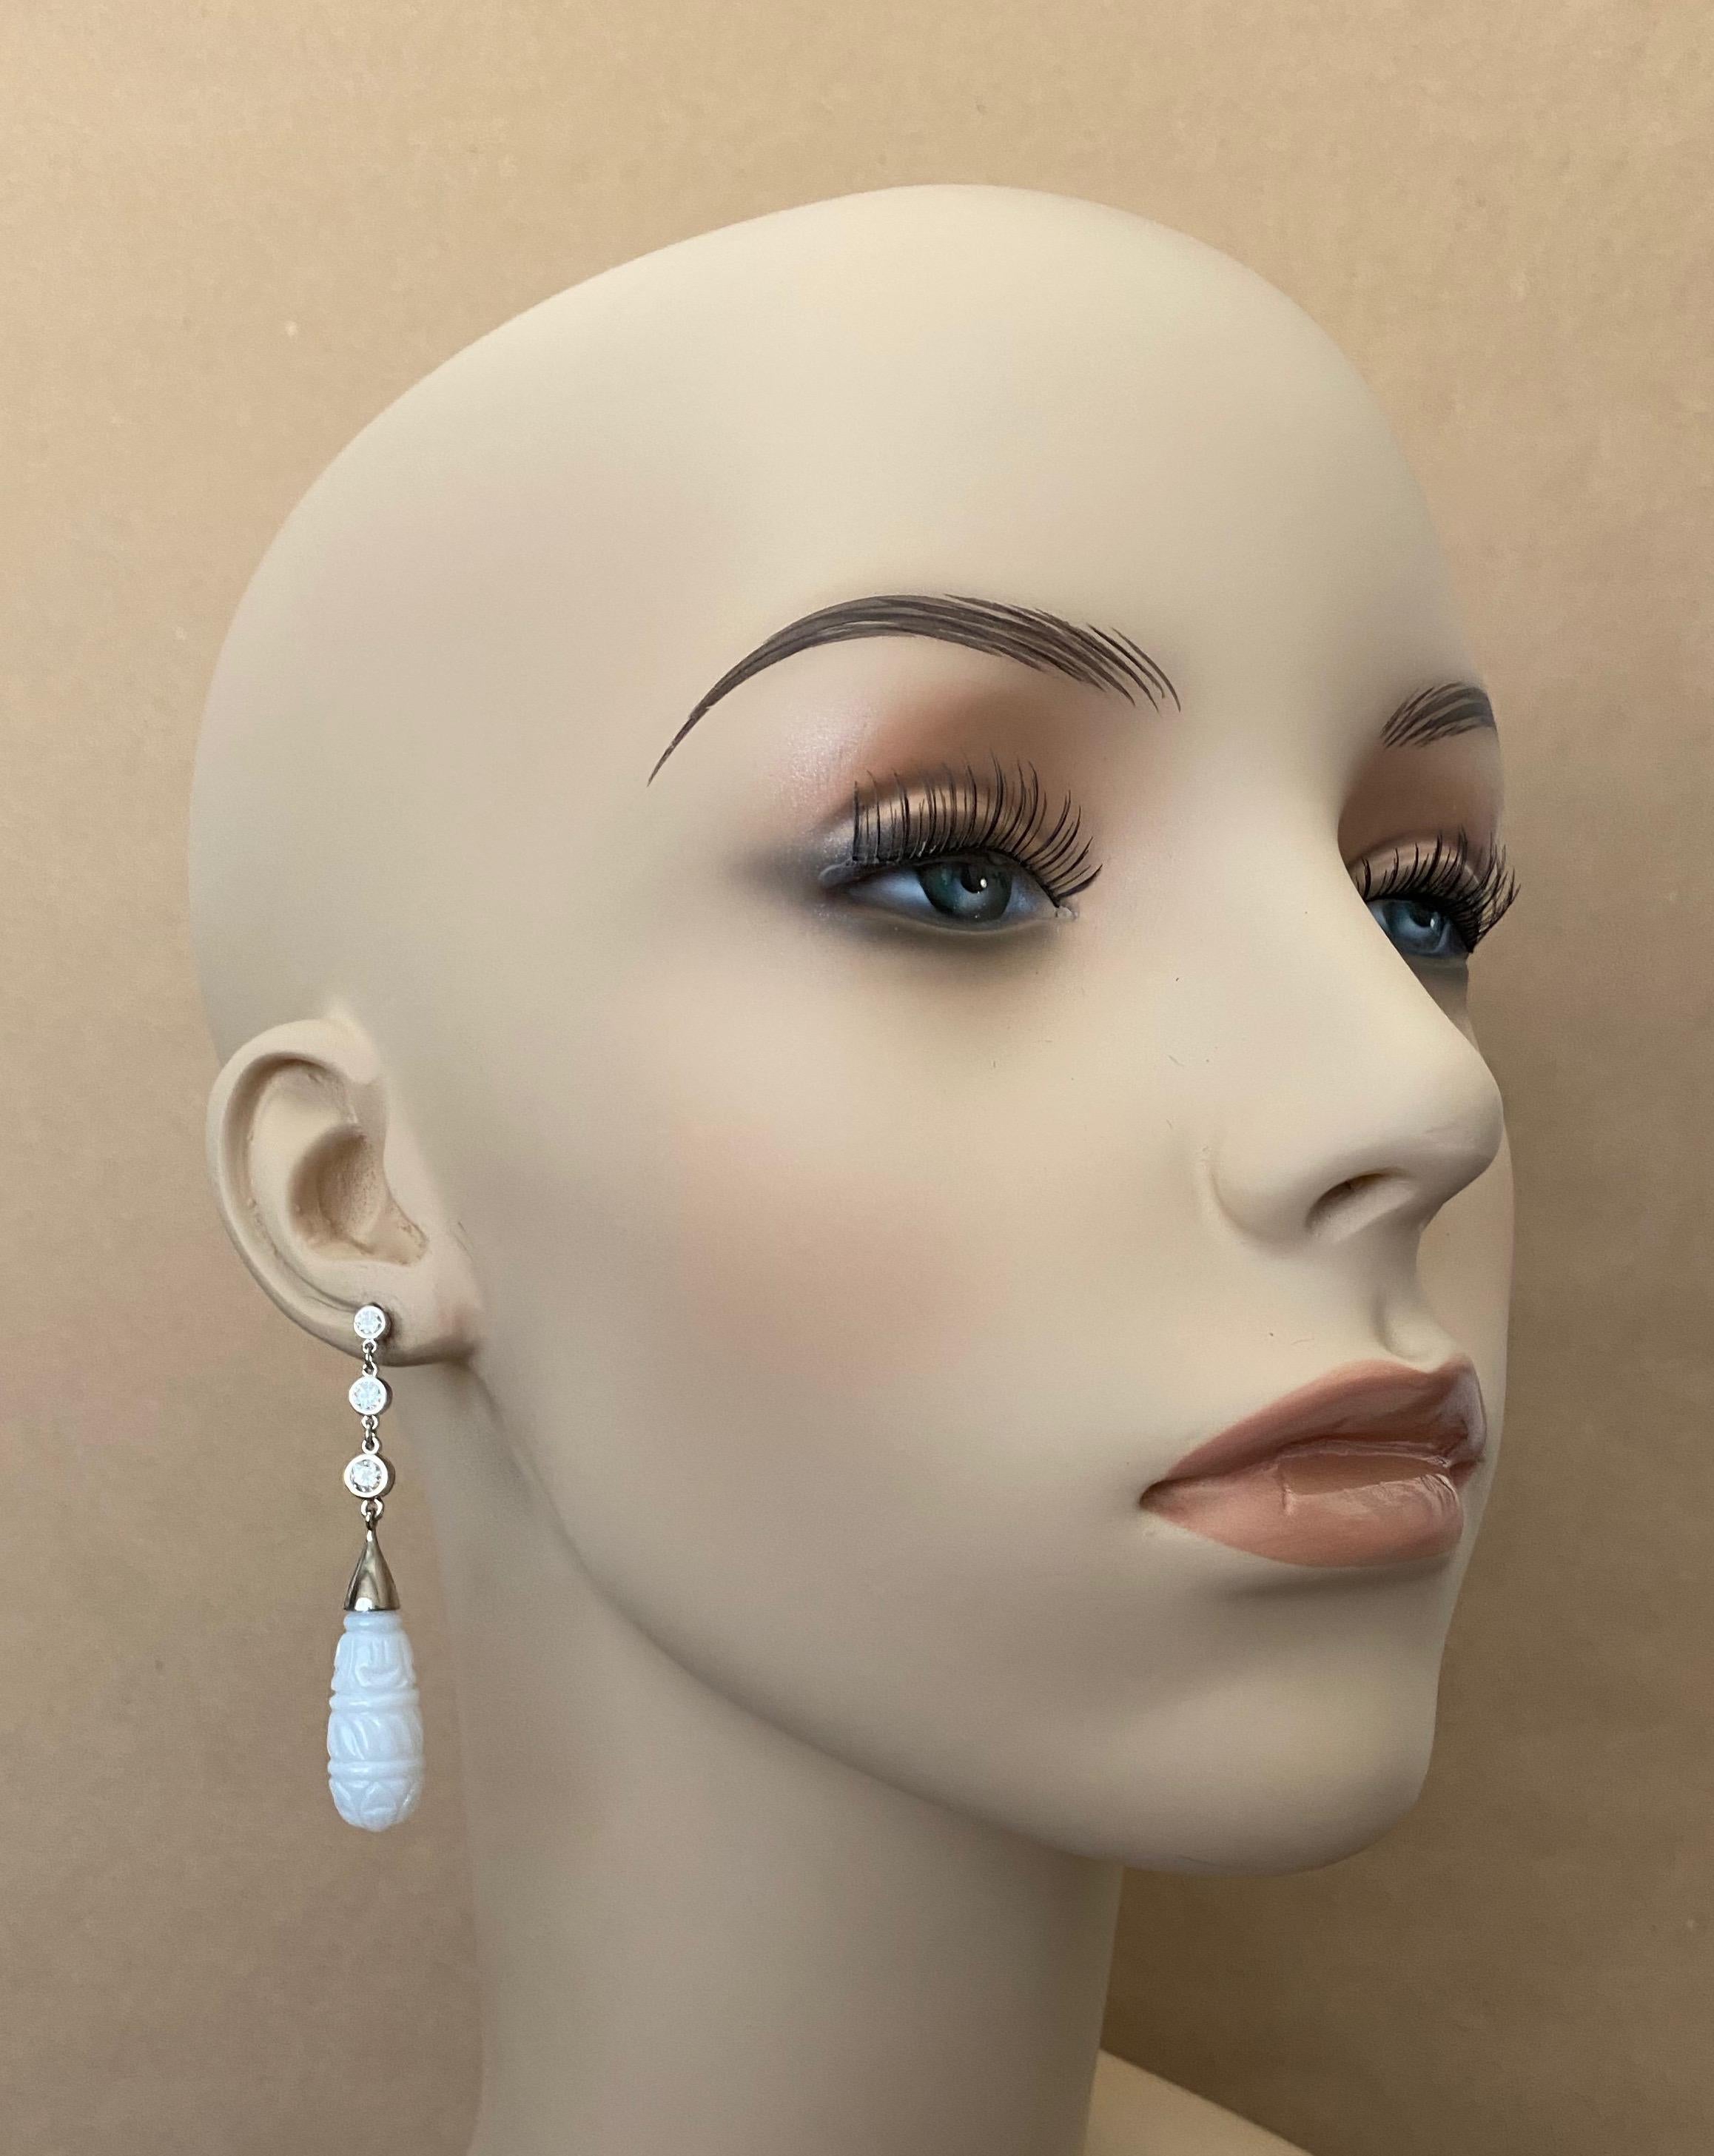 Three bezel set white diamonds in graduated sizes from smaller to larger support beautifully carved white chalcedony drops in these elegant dangle earrings.  The drops were exquisitely carved and polished in exotic India.  The design for these chic